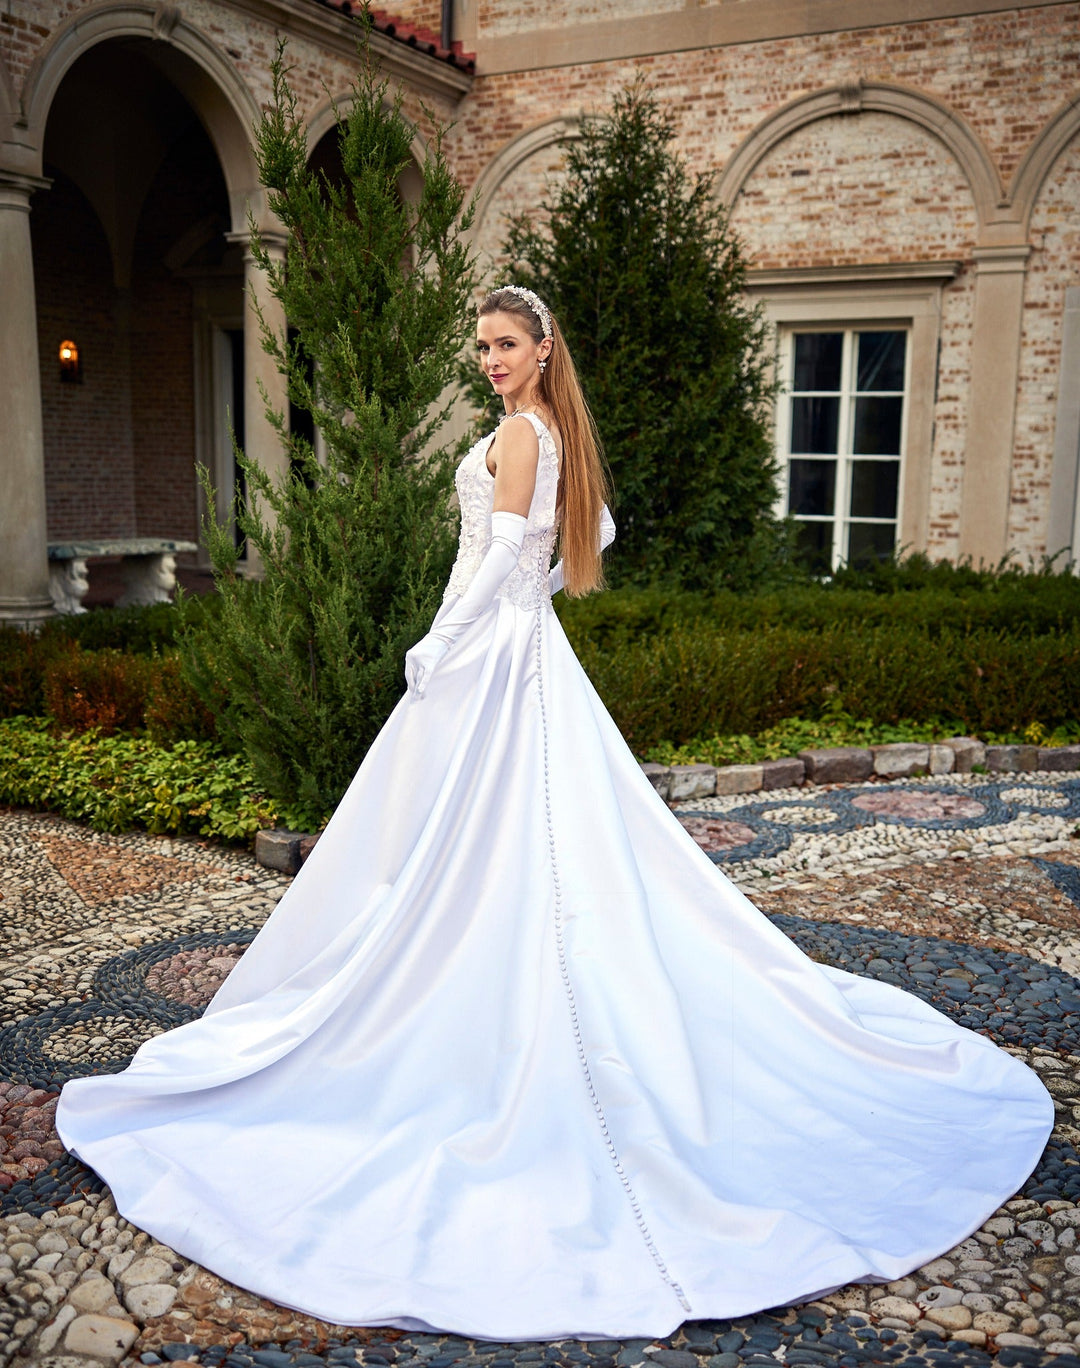 Alesia Chaika Bridal Couture owns and wedding dresses